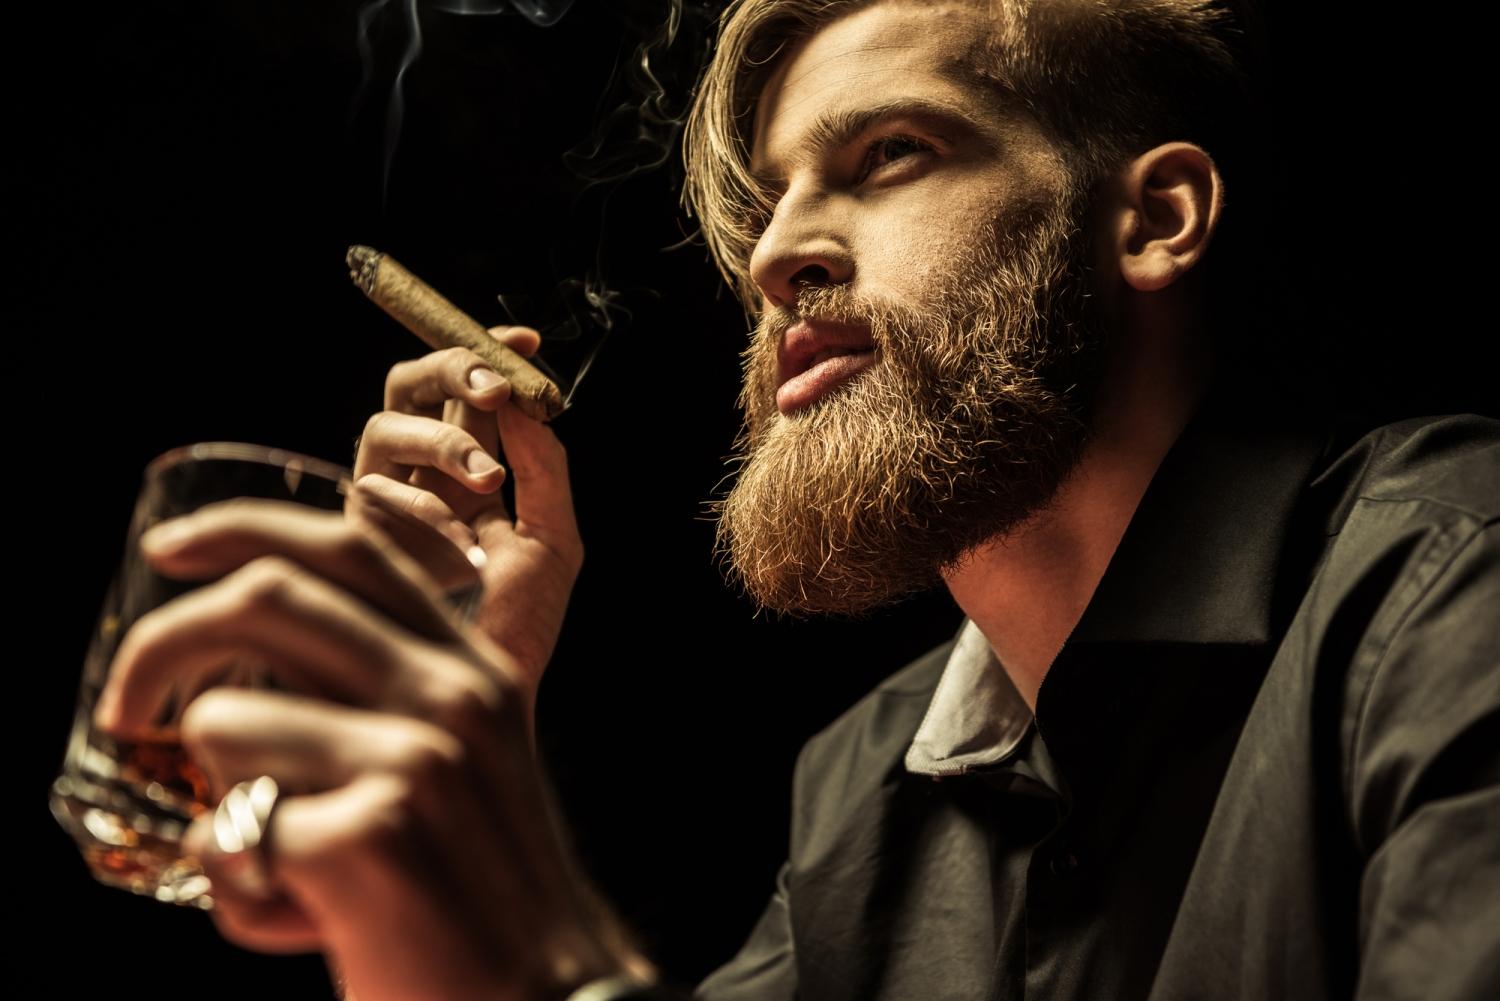 Handsome Bearded Man Holding Glass Of Whisky And Smoking Cigar On Black Stag 